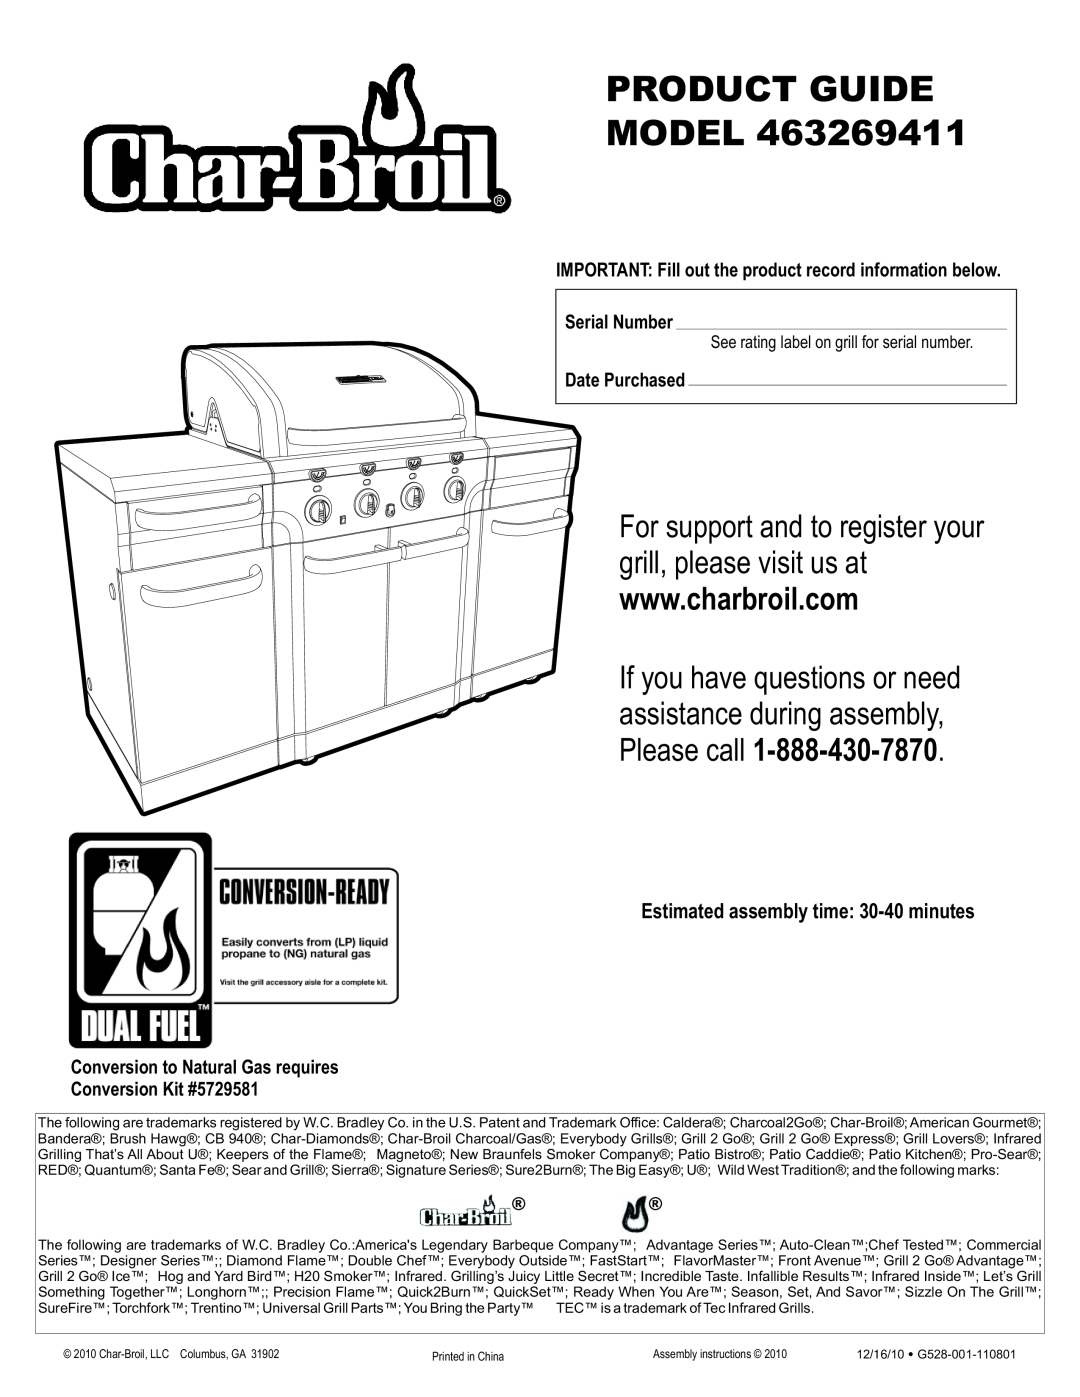 Char-Broil 463269411 manual Please call, Estimated assembly time 30-40 minutes, Serial Number, Date Purchased 